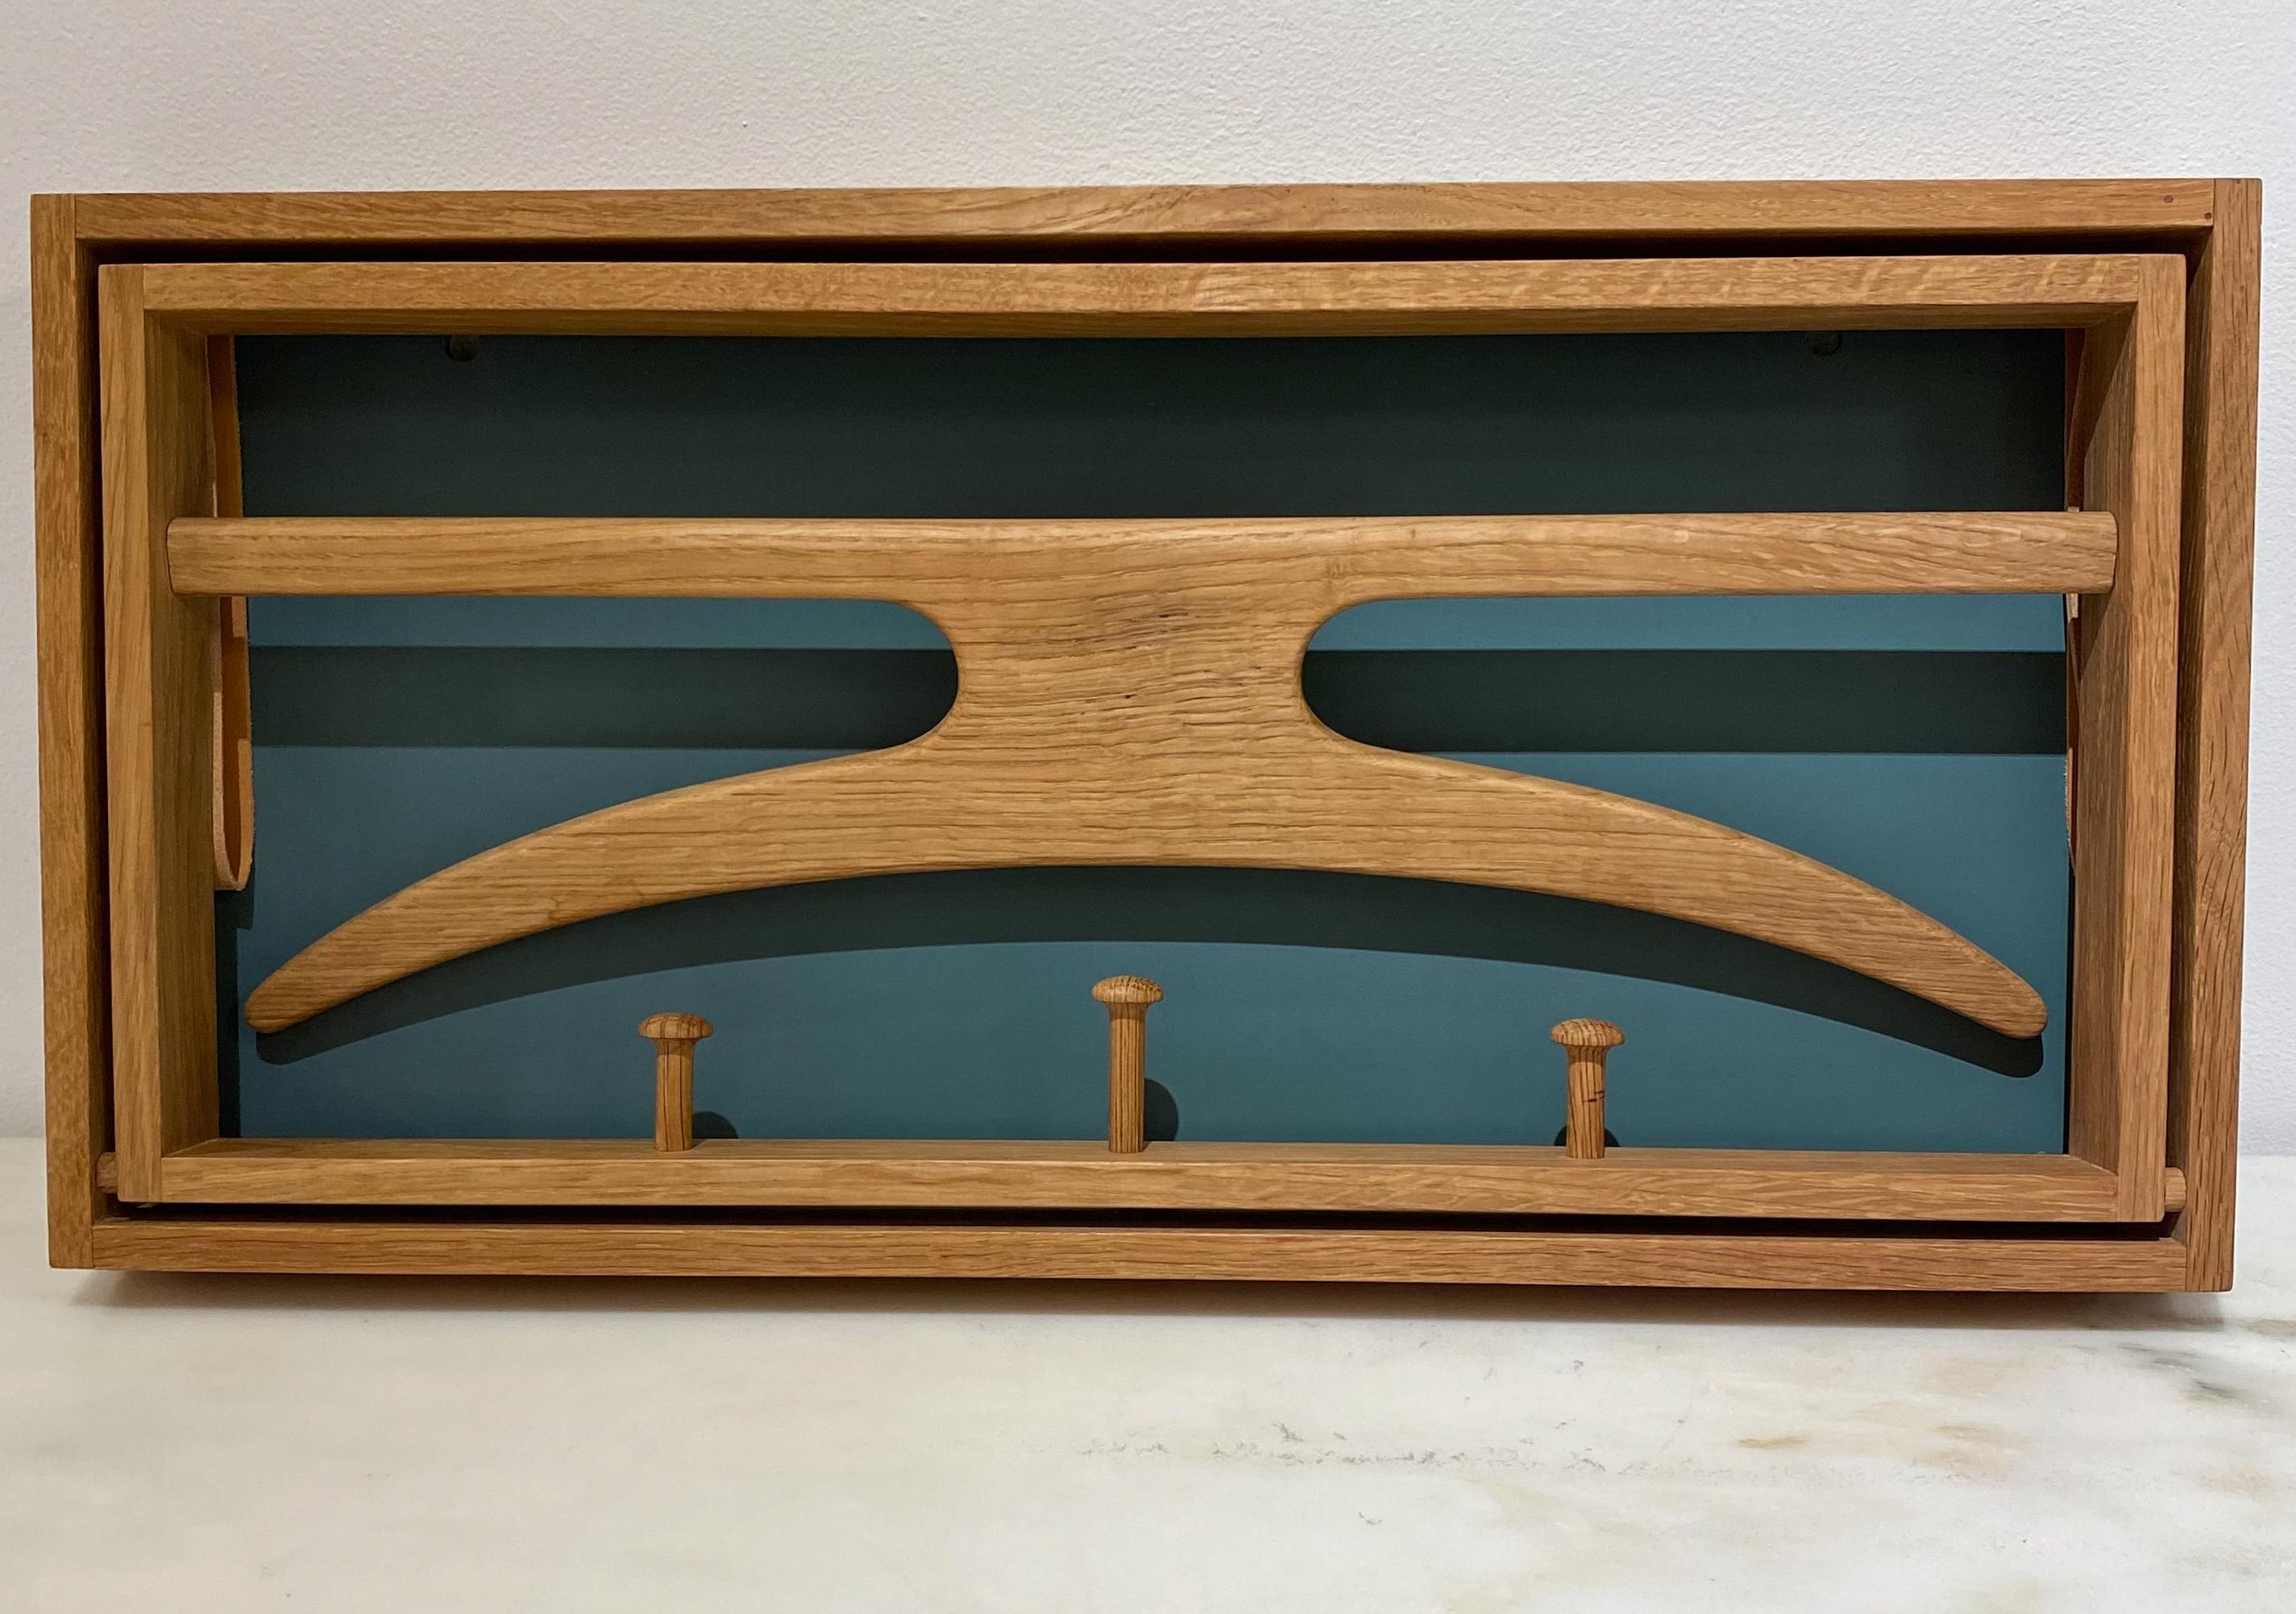 Wall-mount valet in oak with leather straps and lacquered masonite back panel by Adam Hoff and Paul Ostergaard for Virum Mobelsnedkeri, Denmark, c. 1960's. A sculptural and flexibly functional composition with nice details, including the dovetail